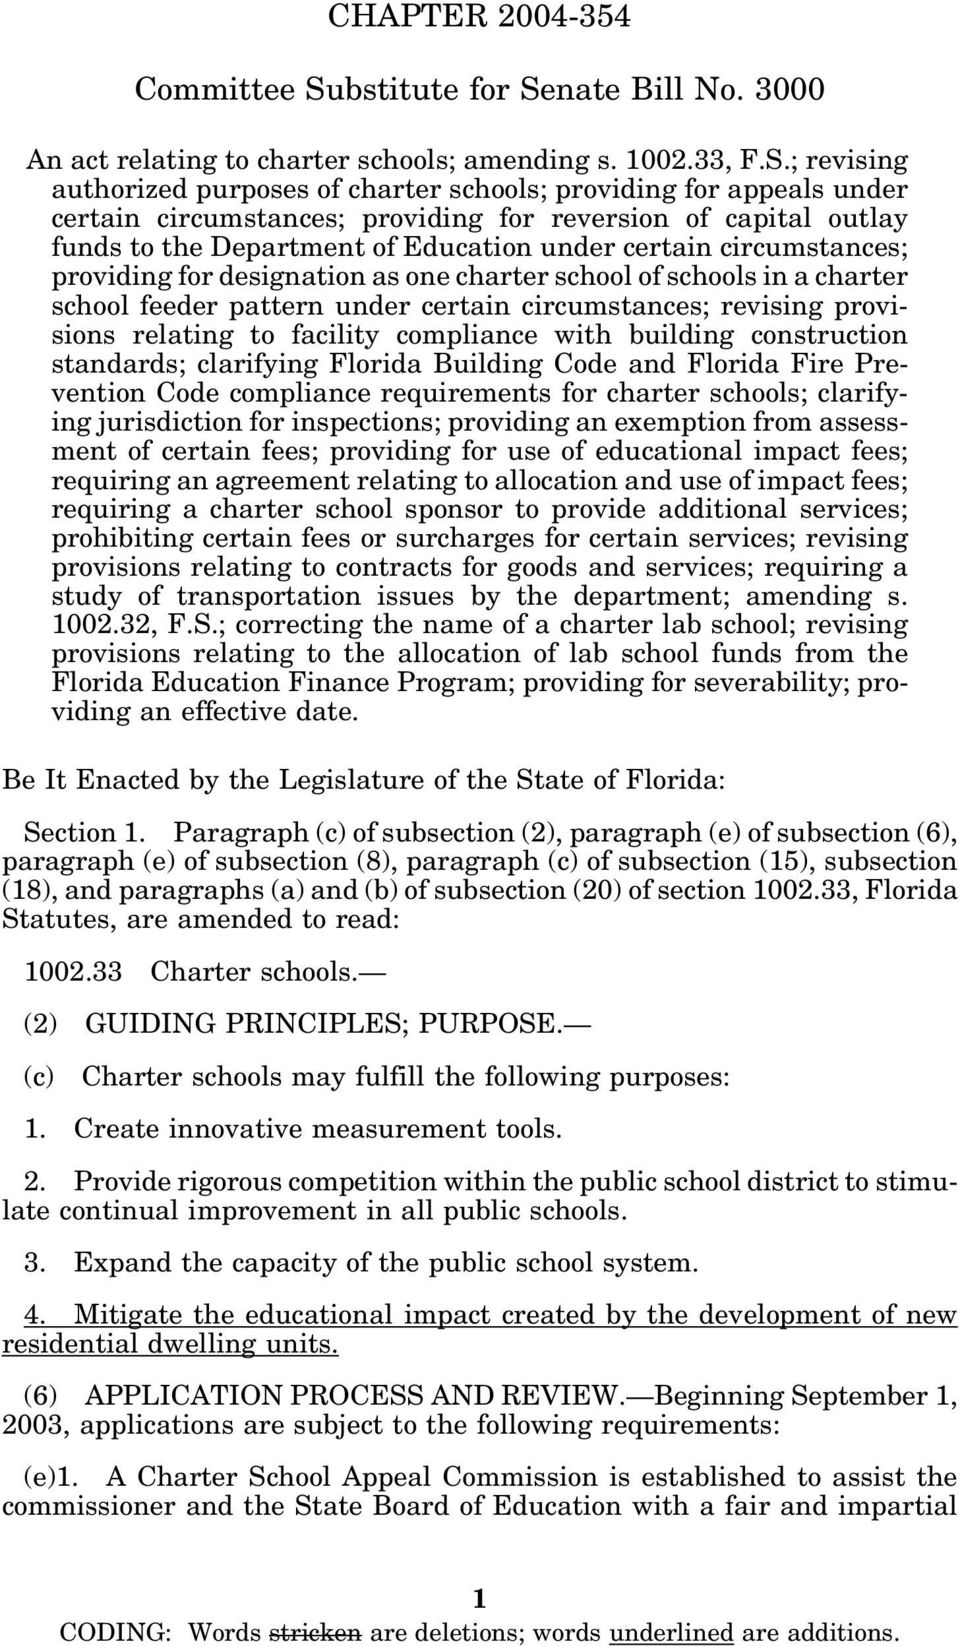 nate Bill No. 3000 An act relating to charter schools; amending s. 1002.33, F.S.